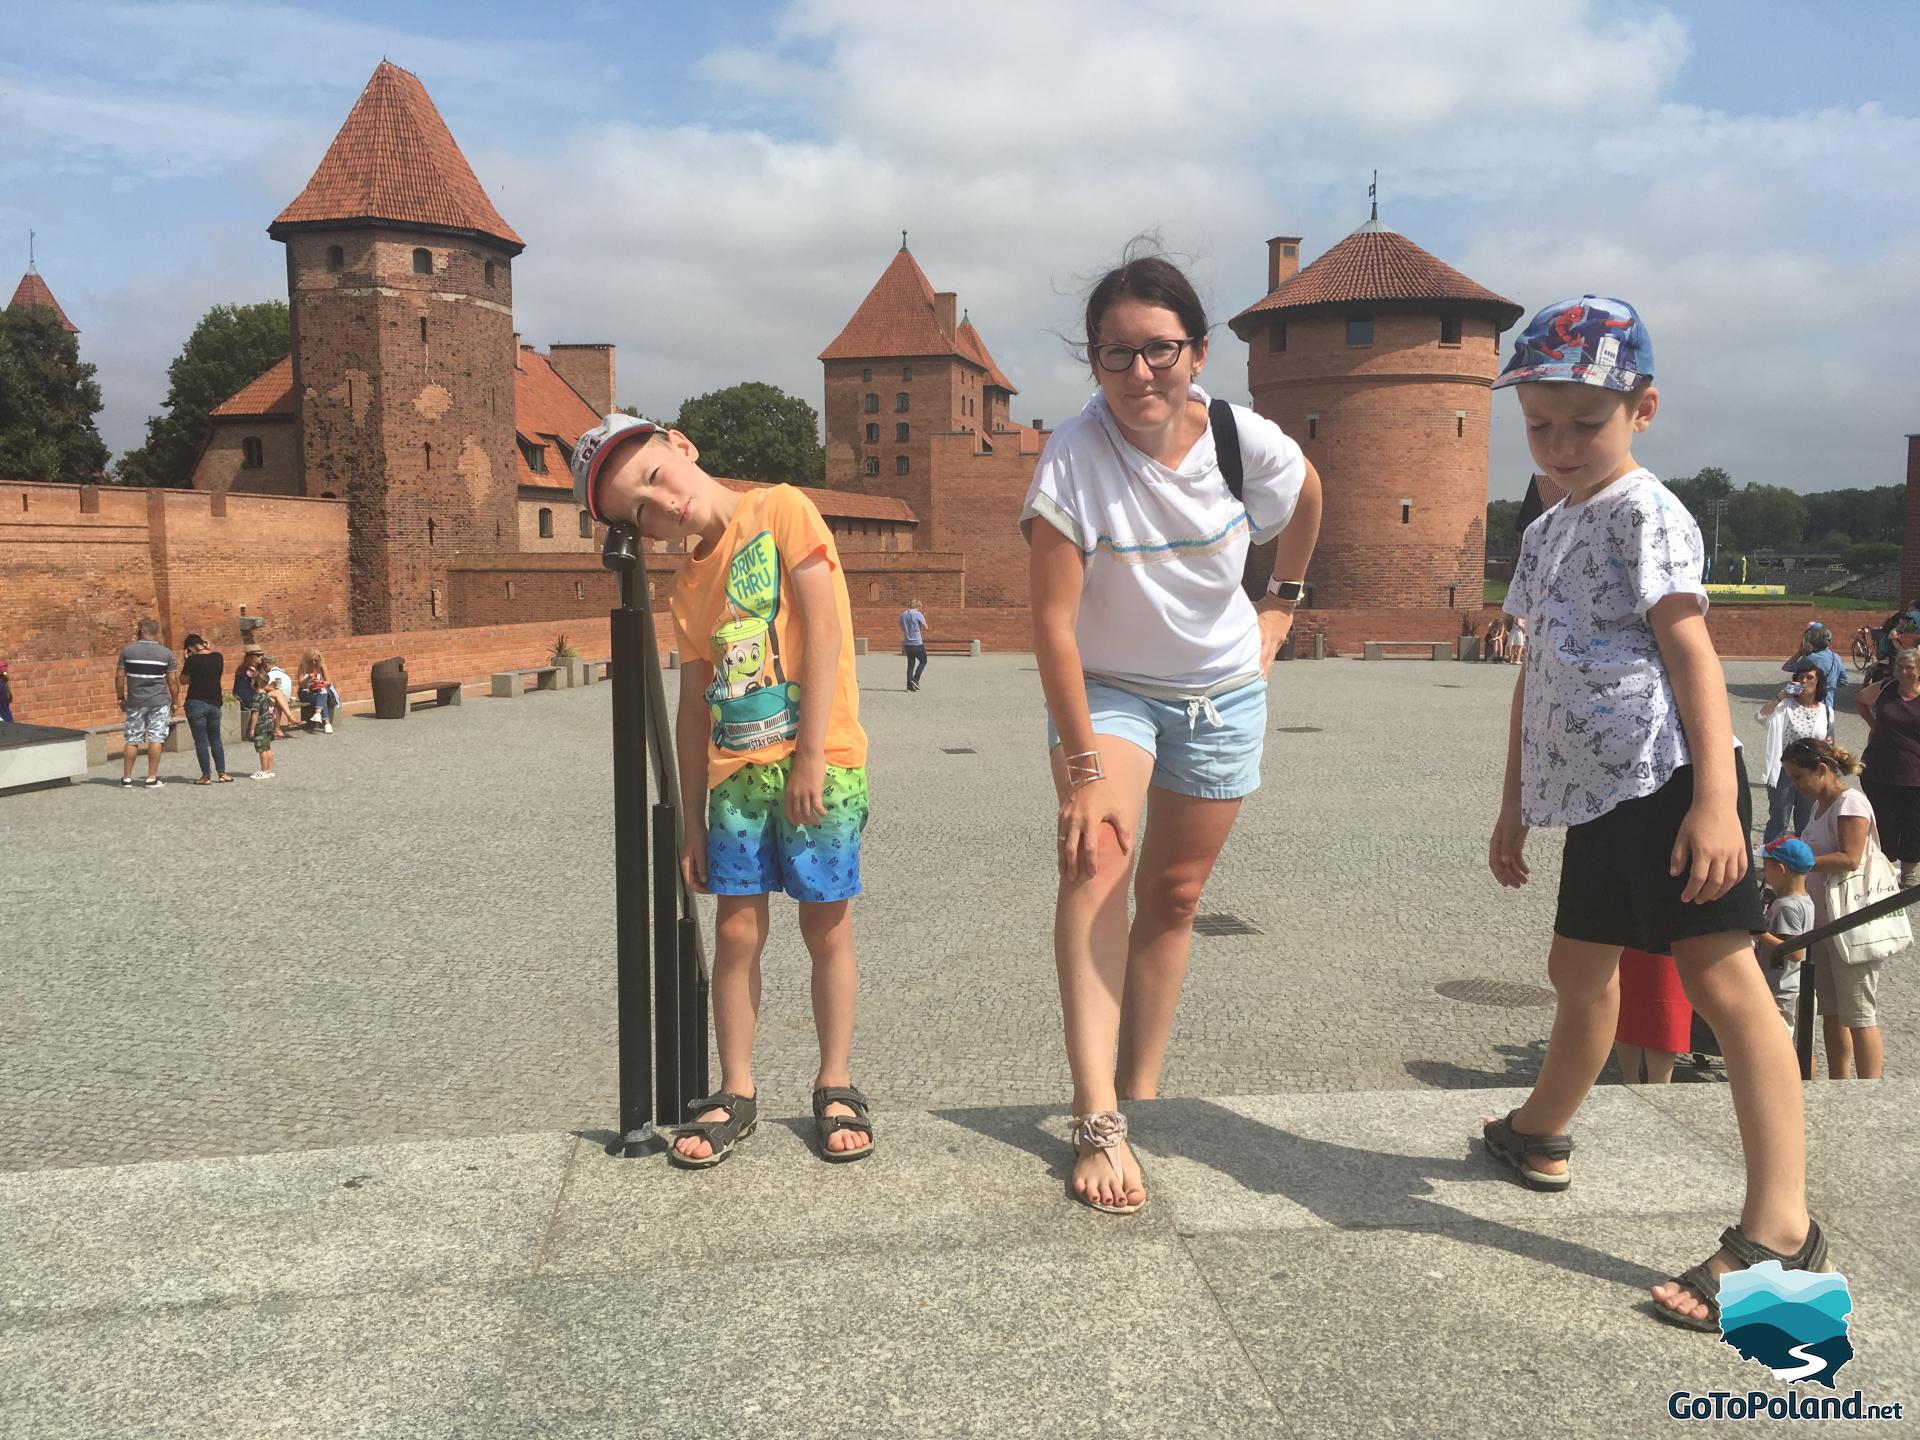 in the foreground is a woman and two boys, behind them there is a brick castle